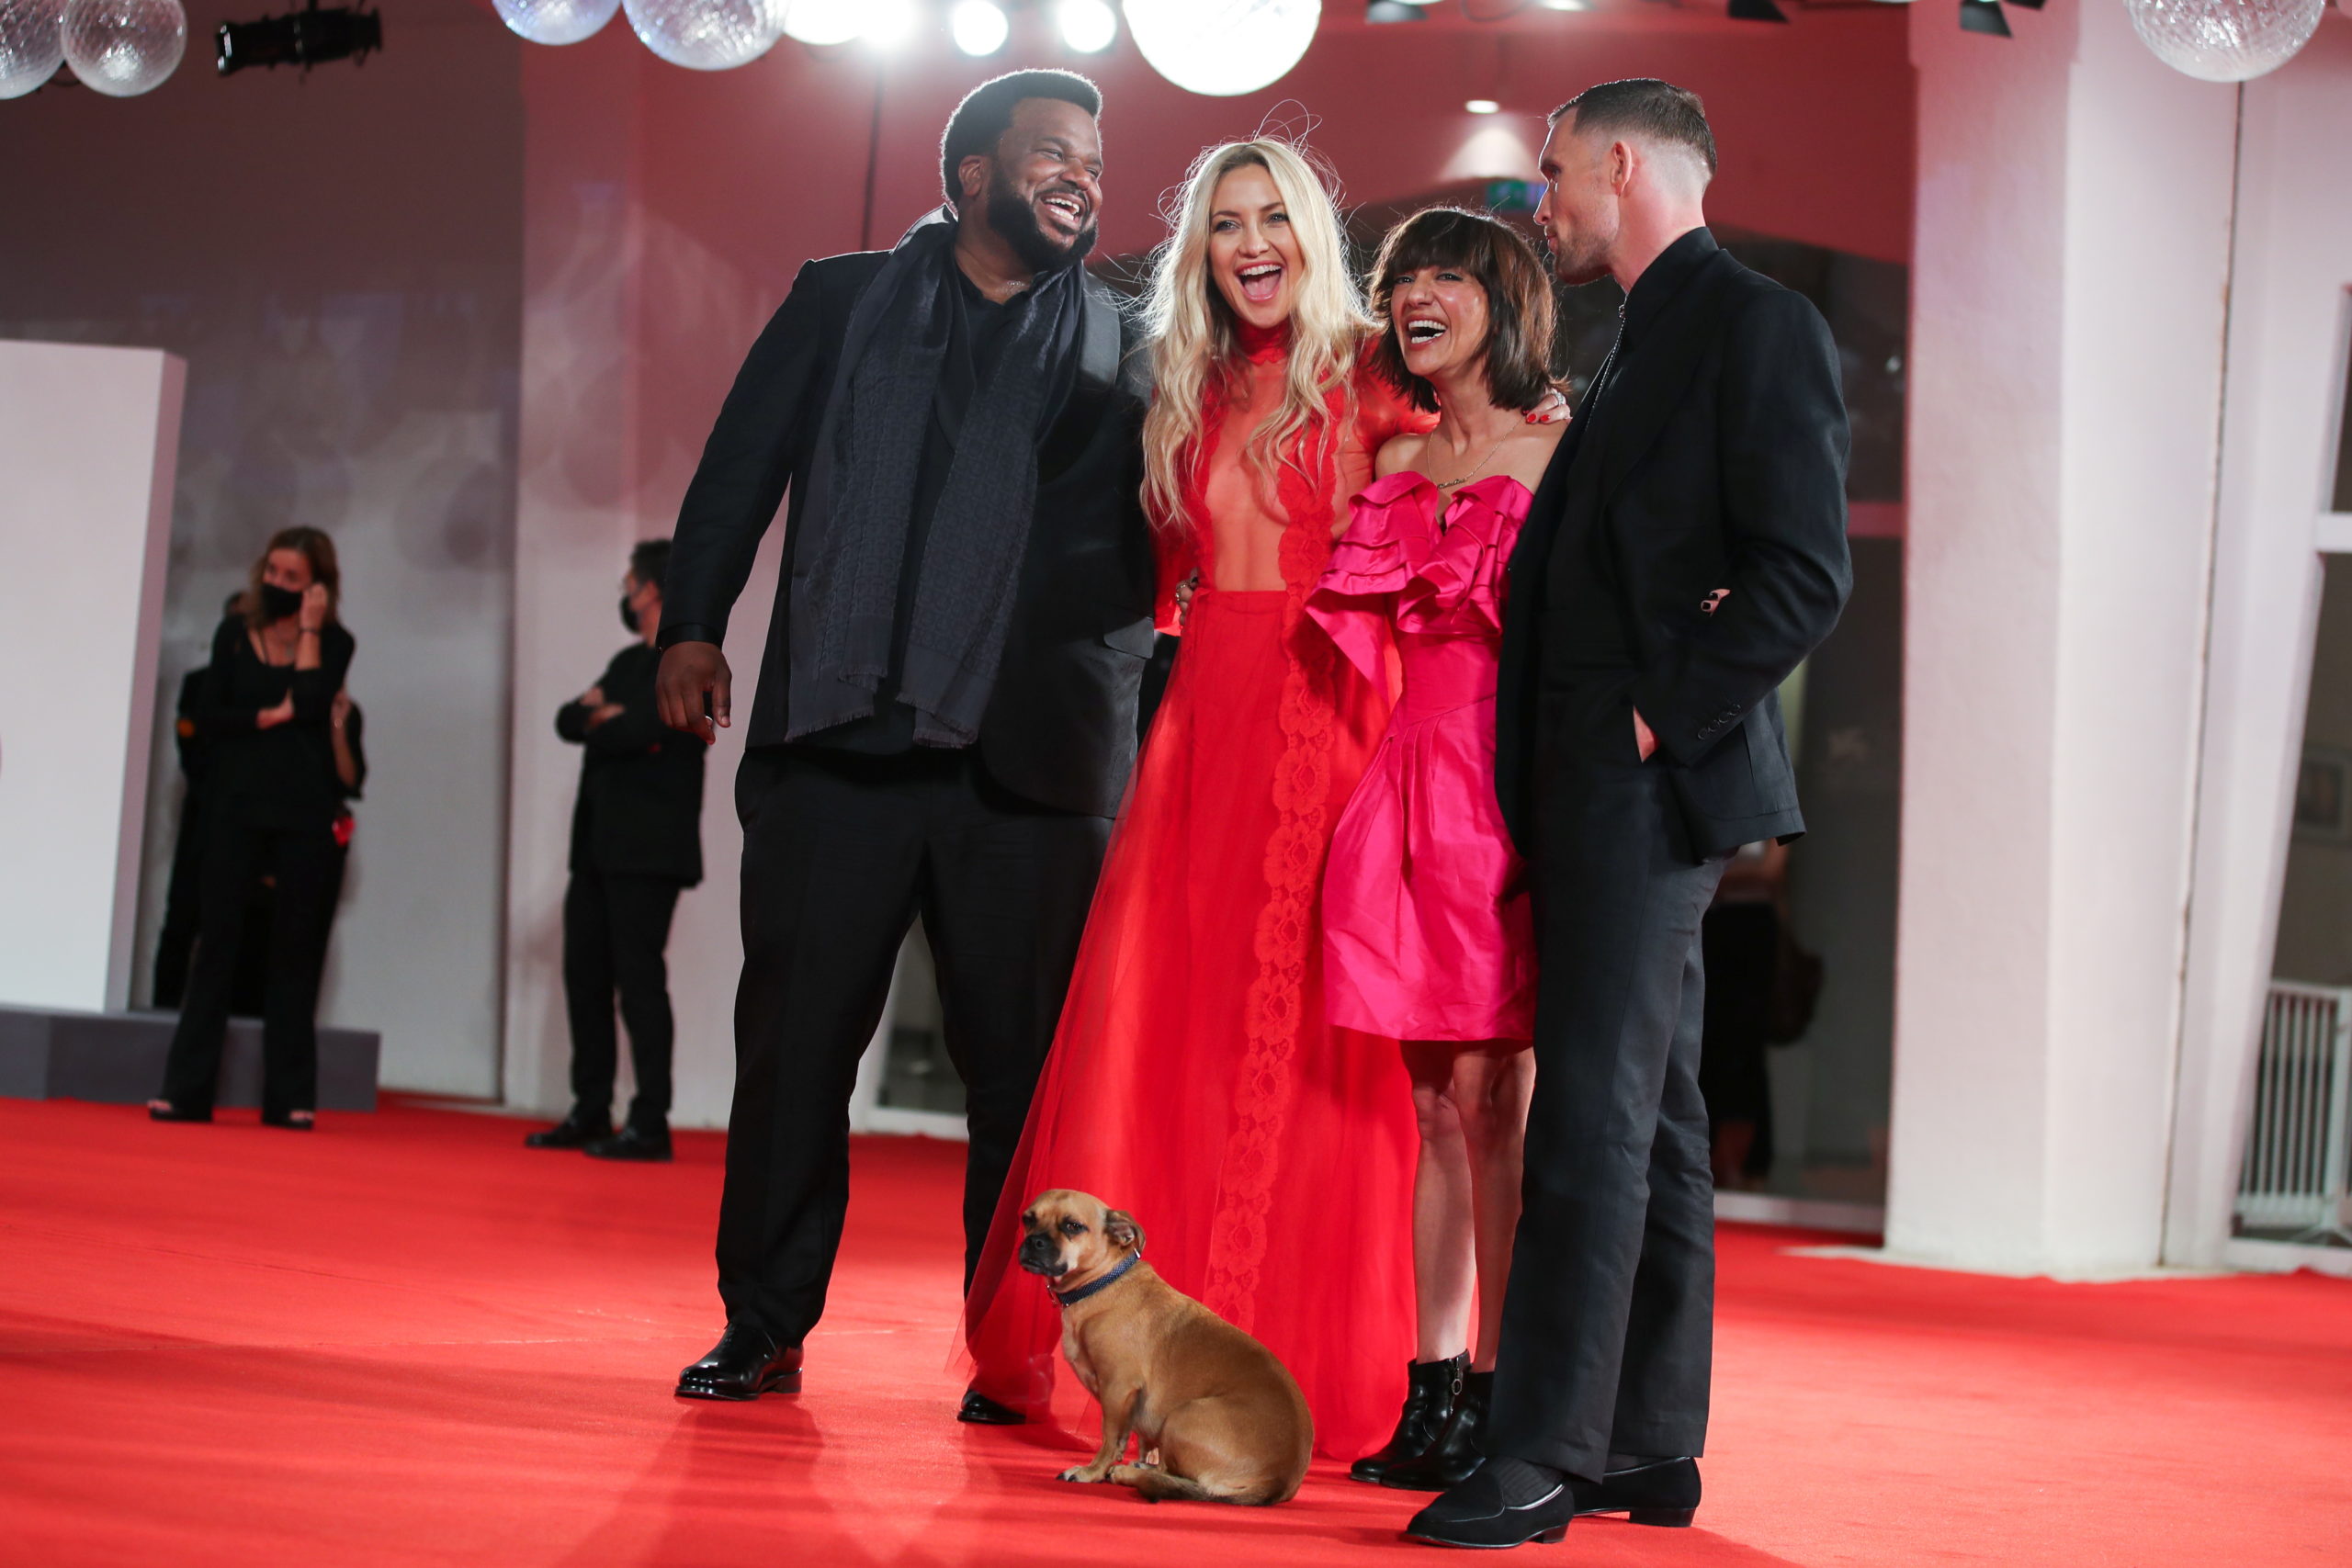 The 78th Venice Film Festival - Screening of the film "Mona Lisa and the Blood Moon" - Red carpet arrivals - Venice, Italy, September 5, 2021 - Actors Ed Skrein, Kate Hudson and Craig Robinson and director Ana Lily Amirpour pose with her dog Benny. 